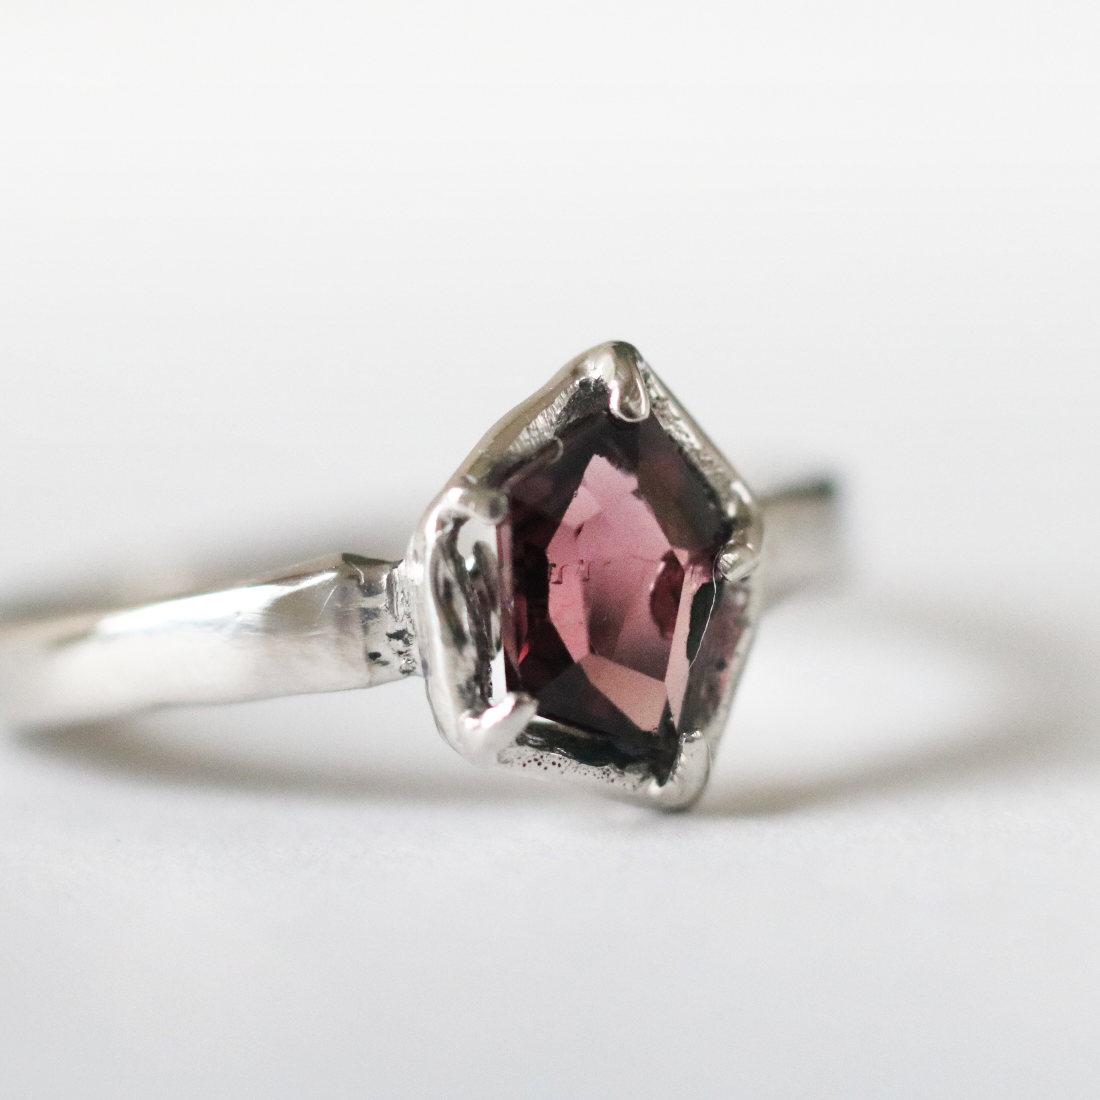 [ One of a kind ] Fancy Cut Spinel I/Pt900